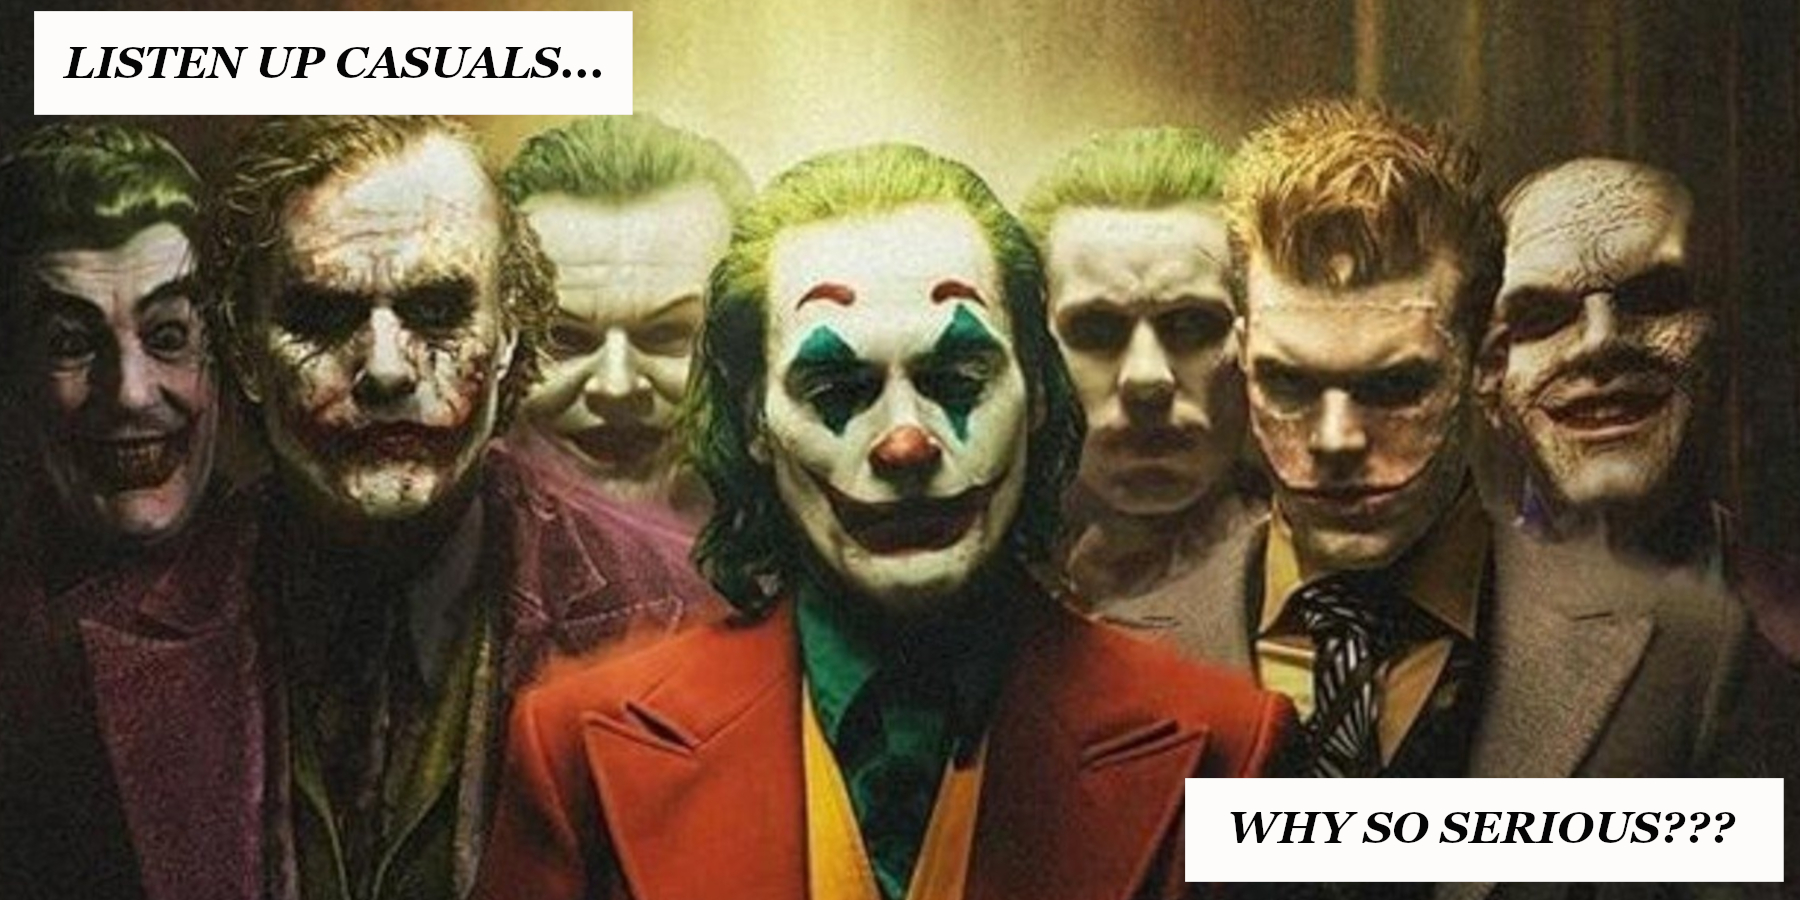 S1.E4 - Why So Serious